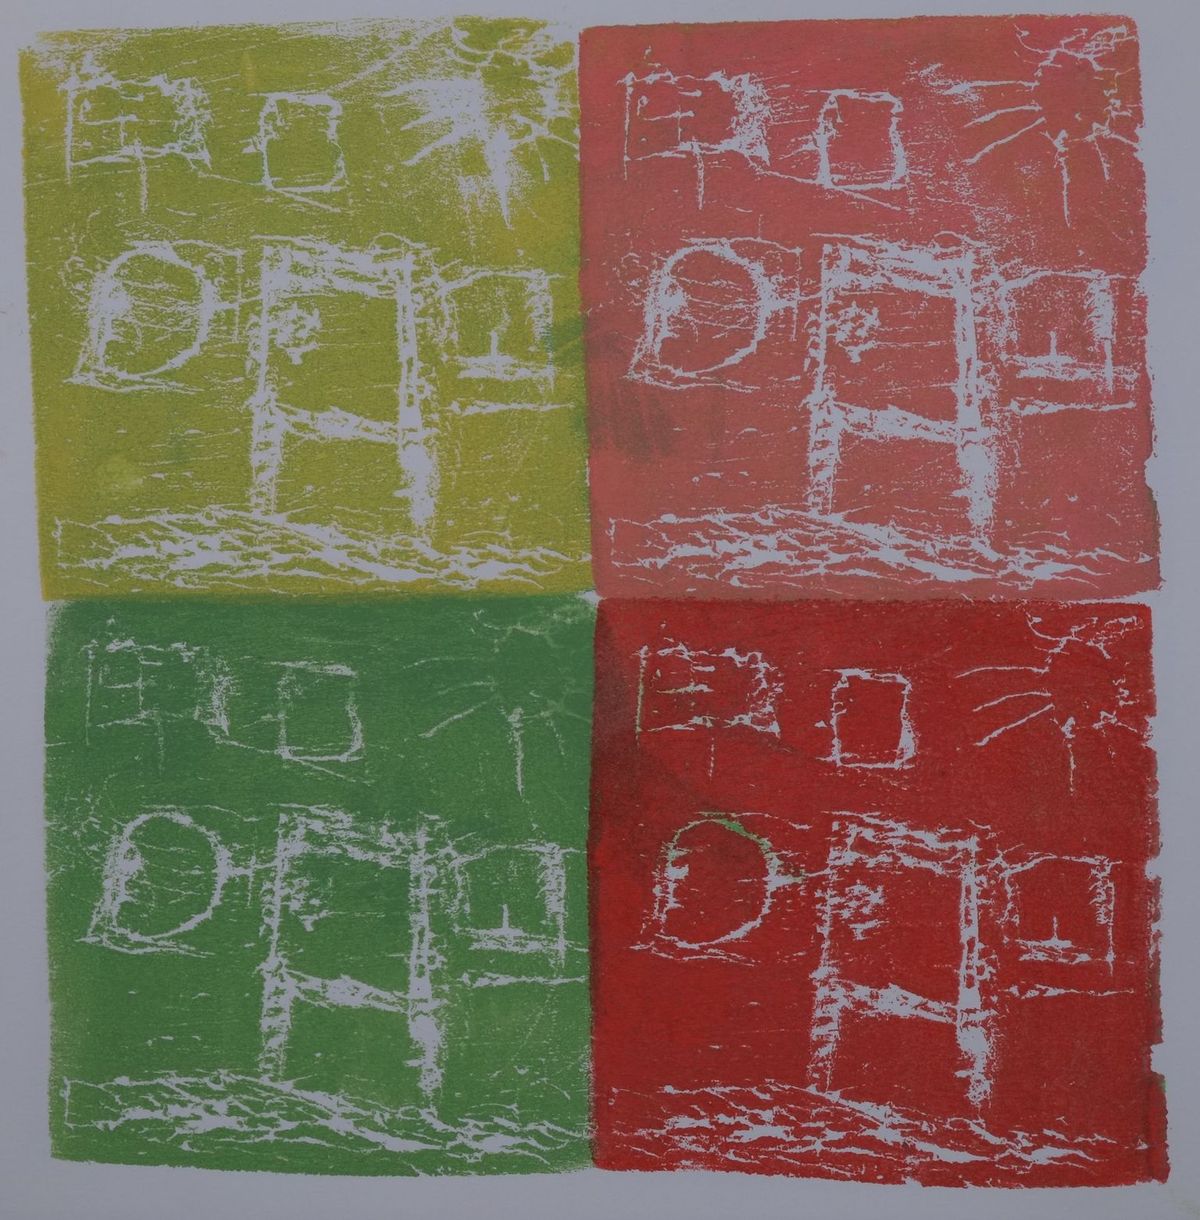 Ink on paper artwork with four colored blocks of lime green, green, coral, and red, each depicting a white house